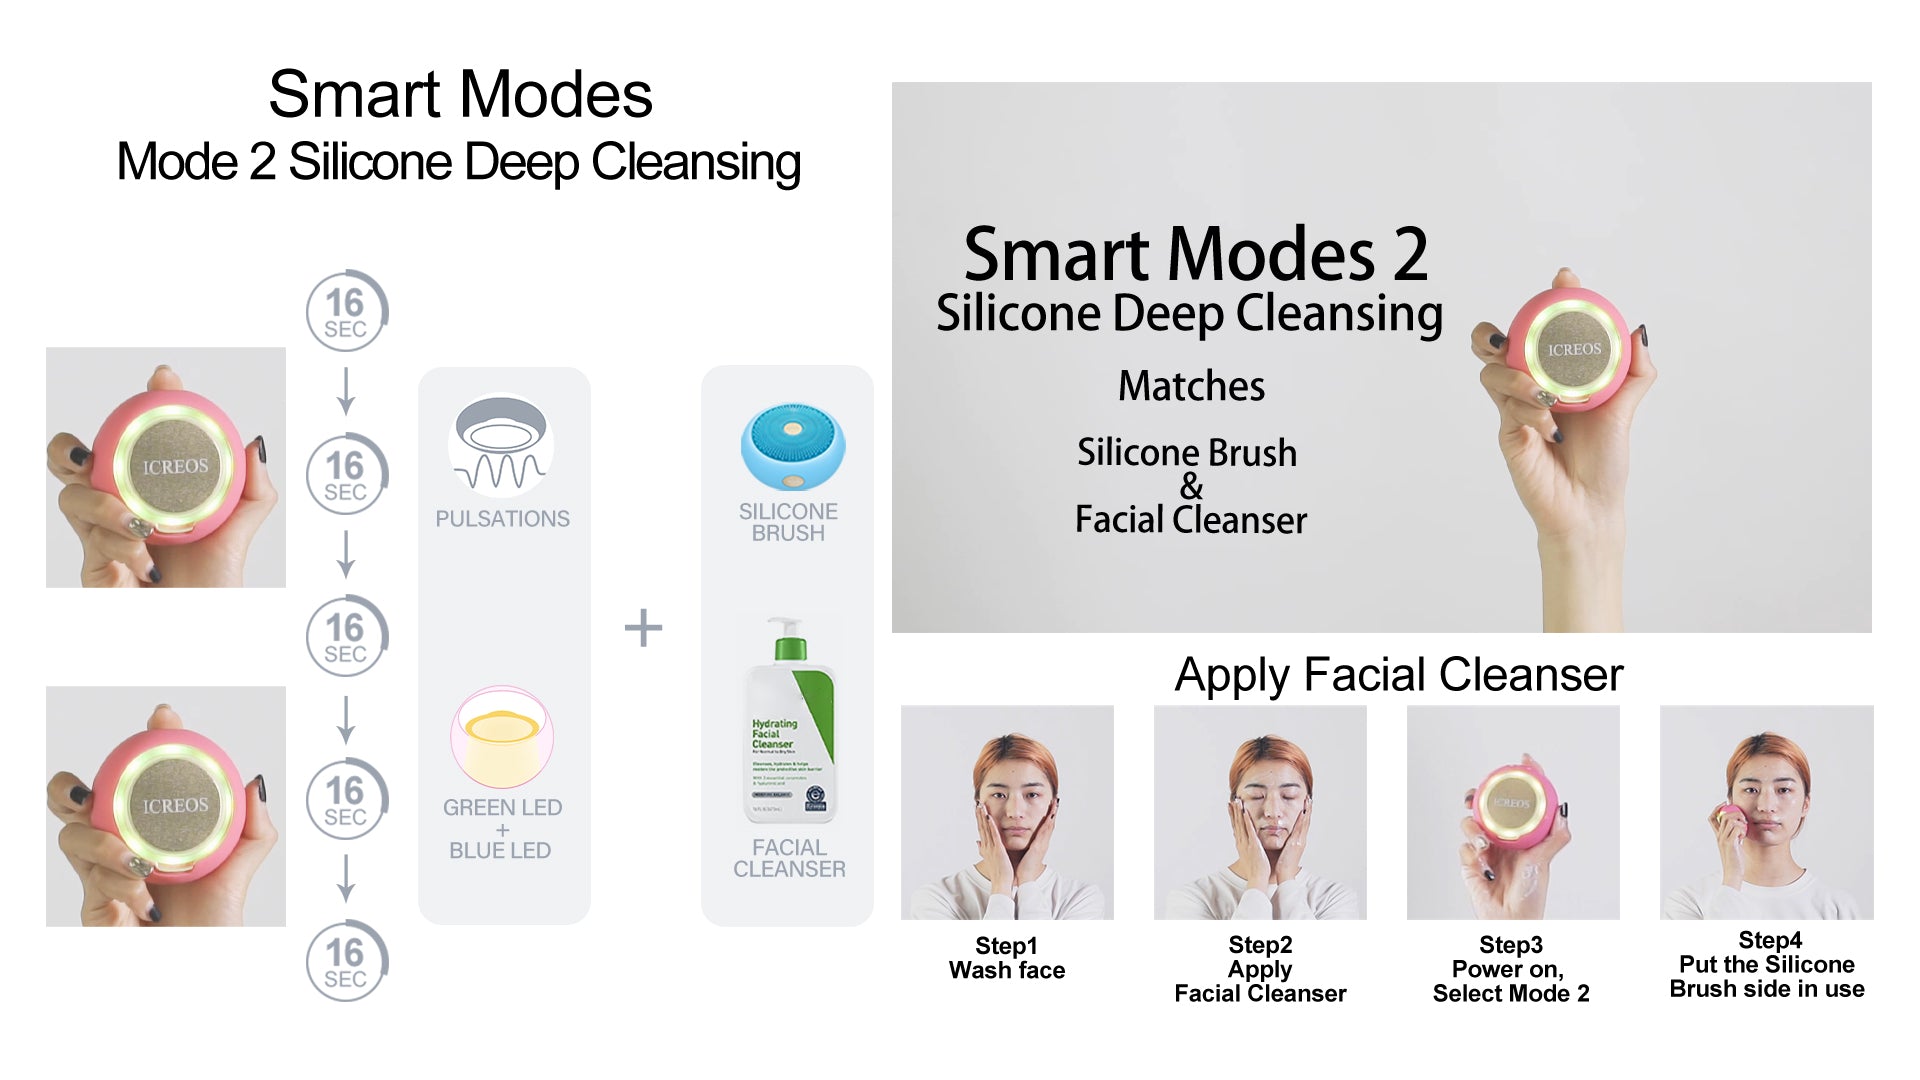 ICREOSMNI-Smart_Modes_2-Silicone_Cleansing-0.jpg